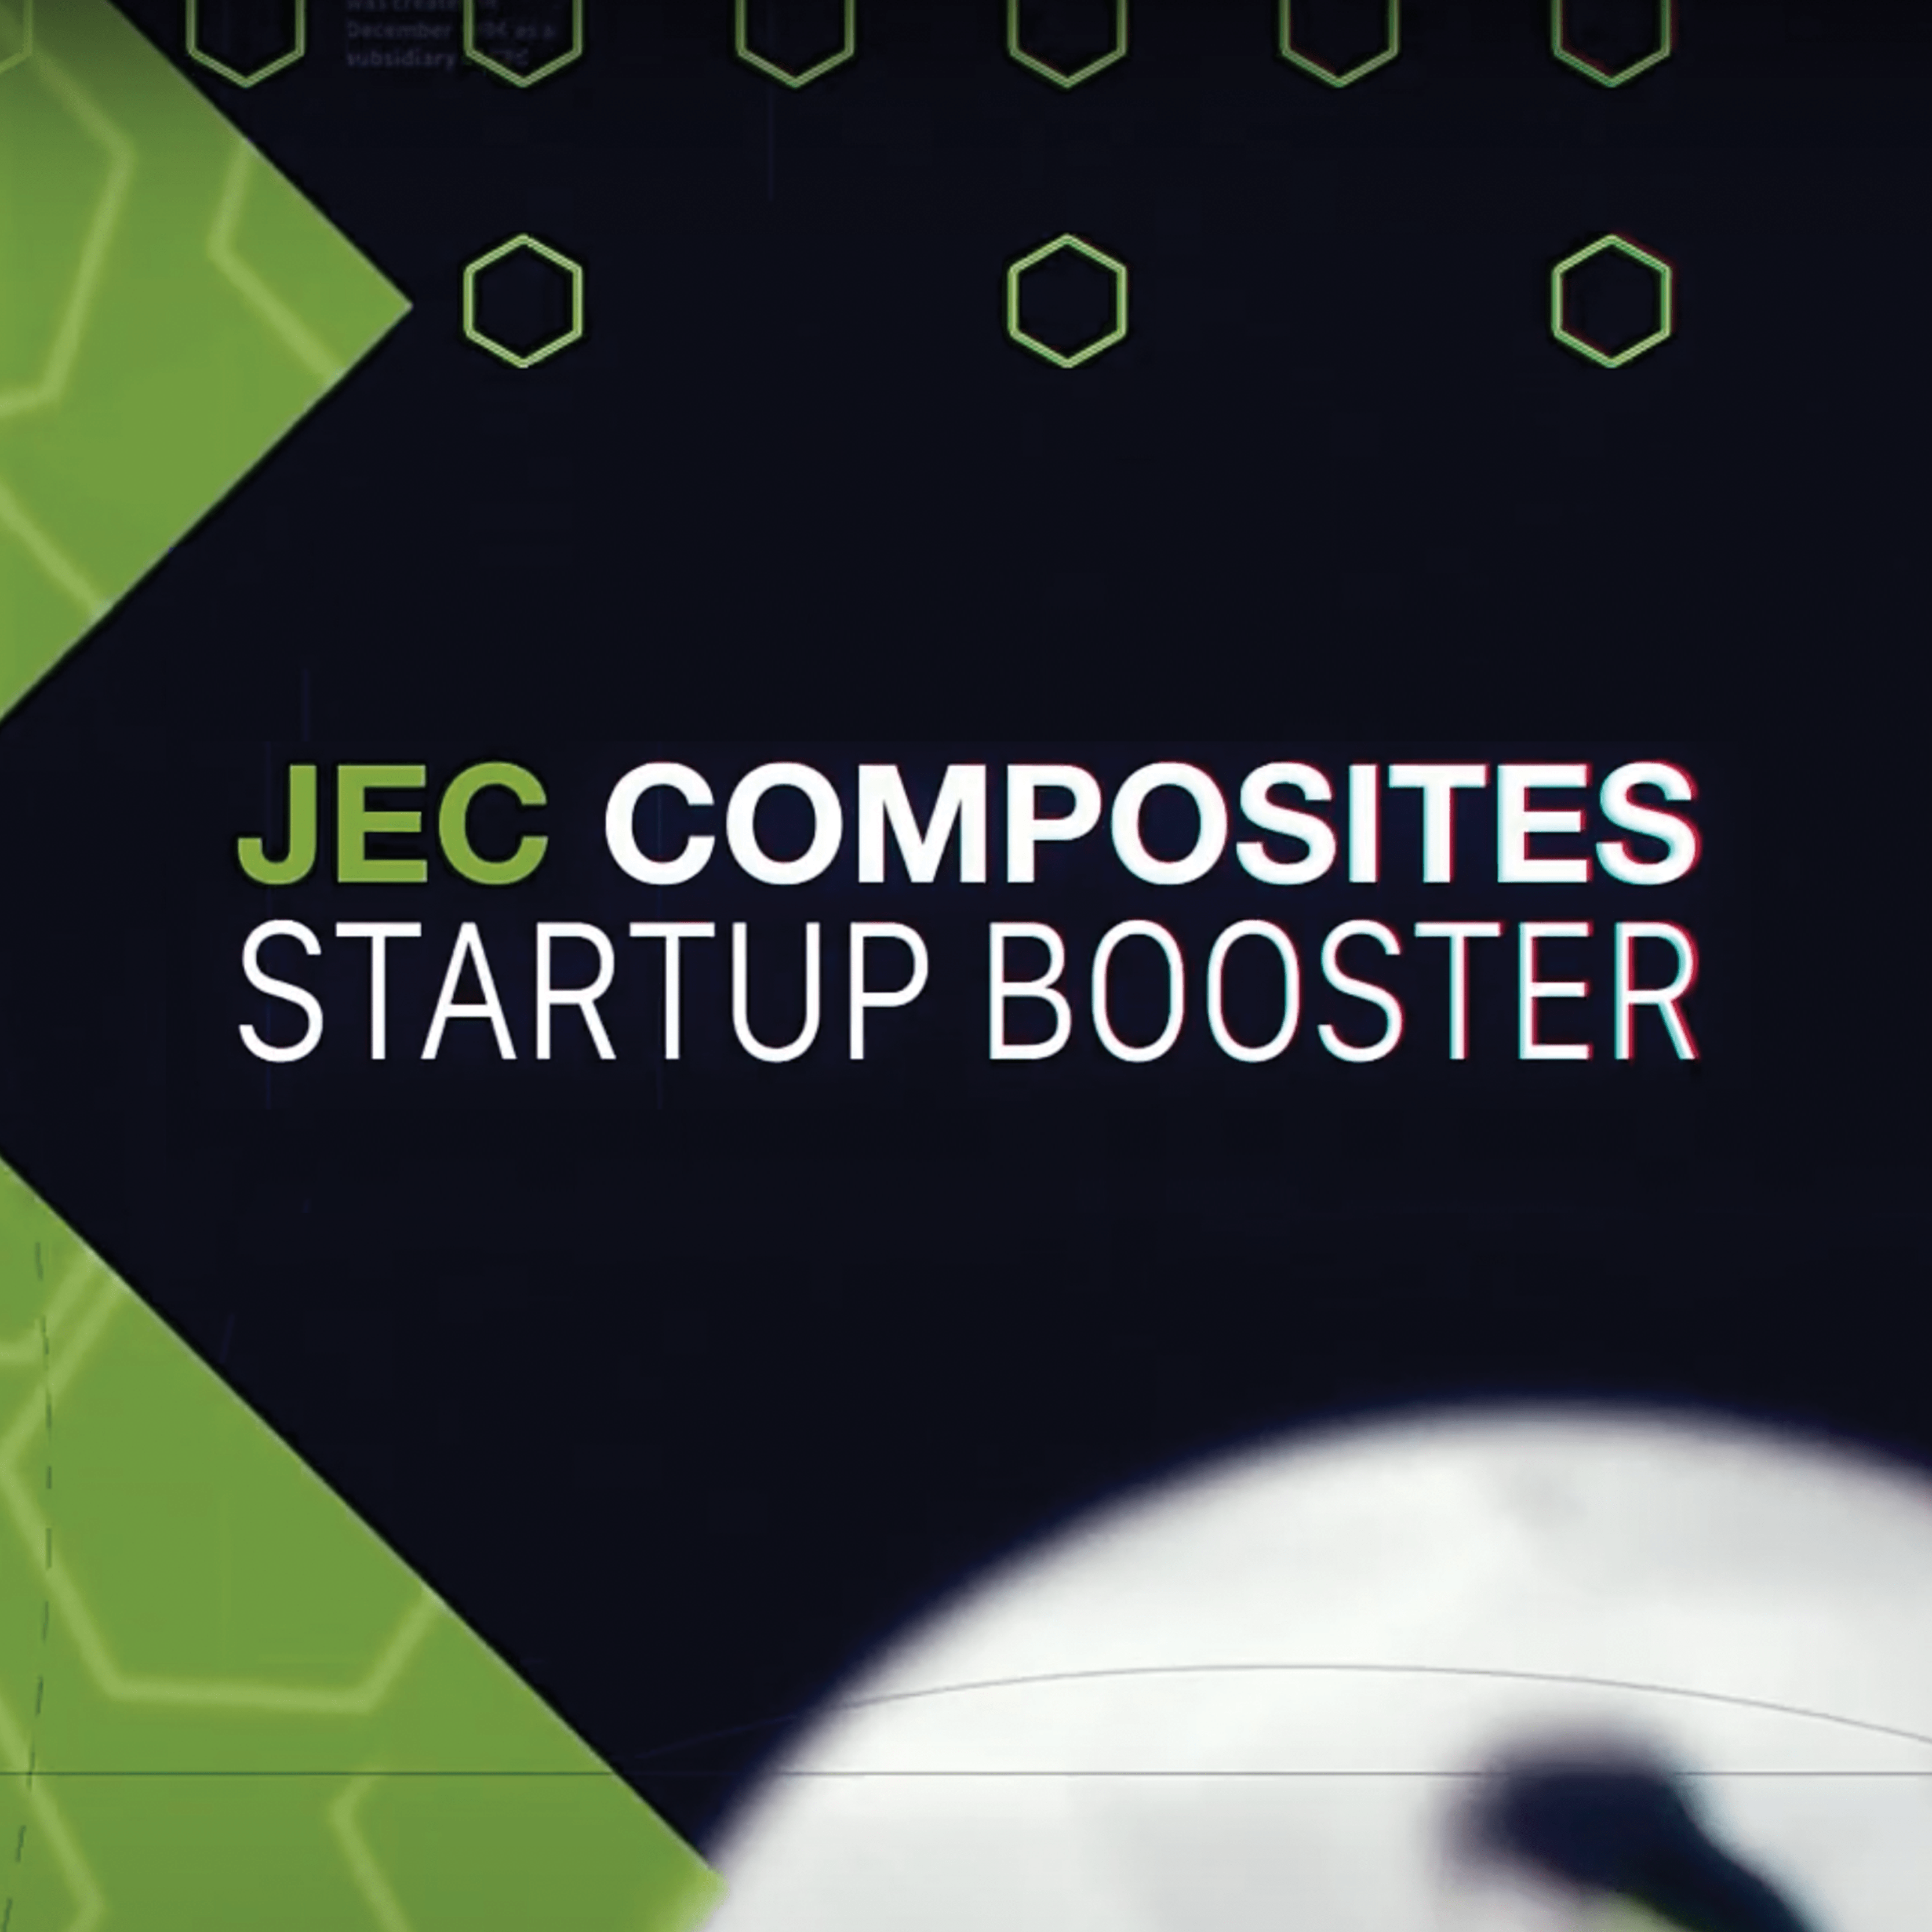 JEC Composites Startup Booster, 3 years later